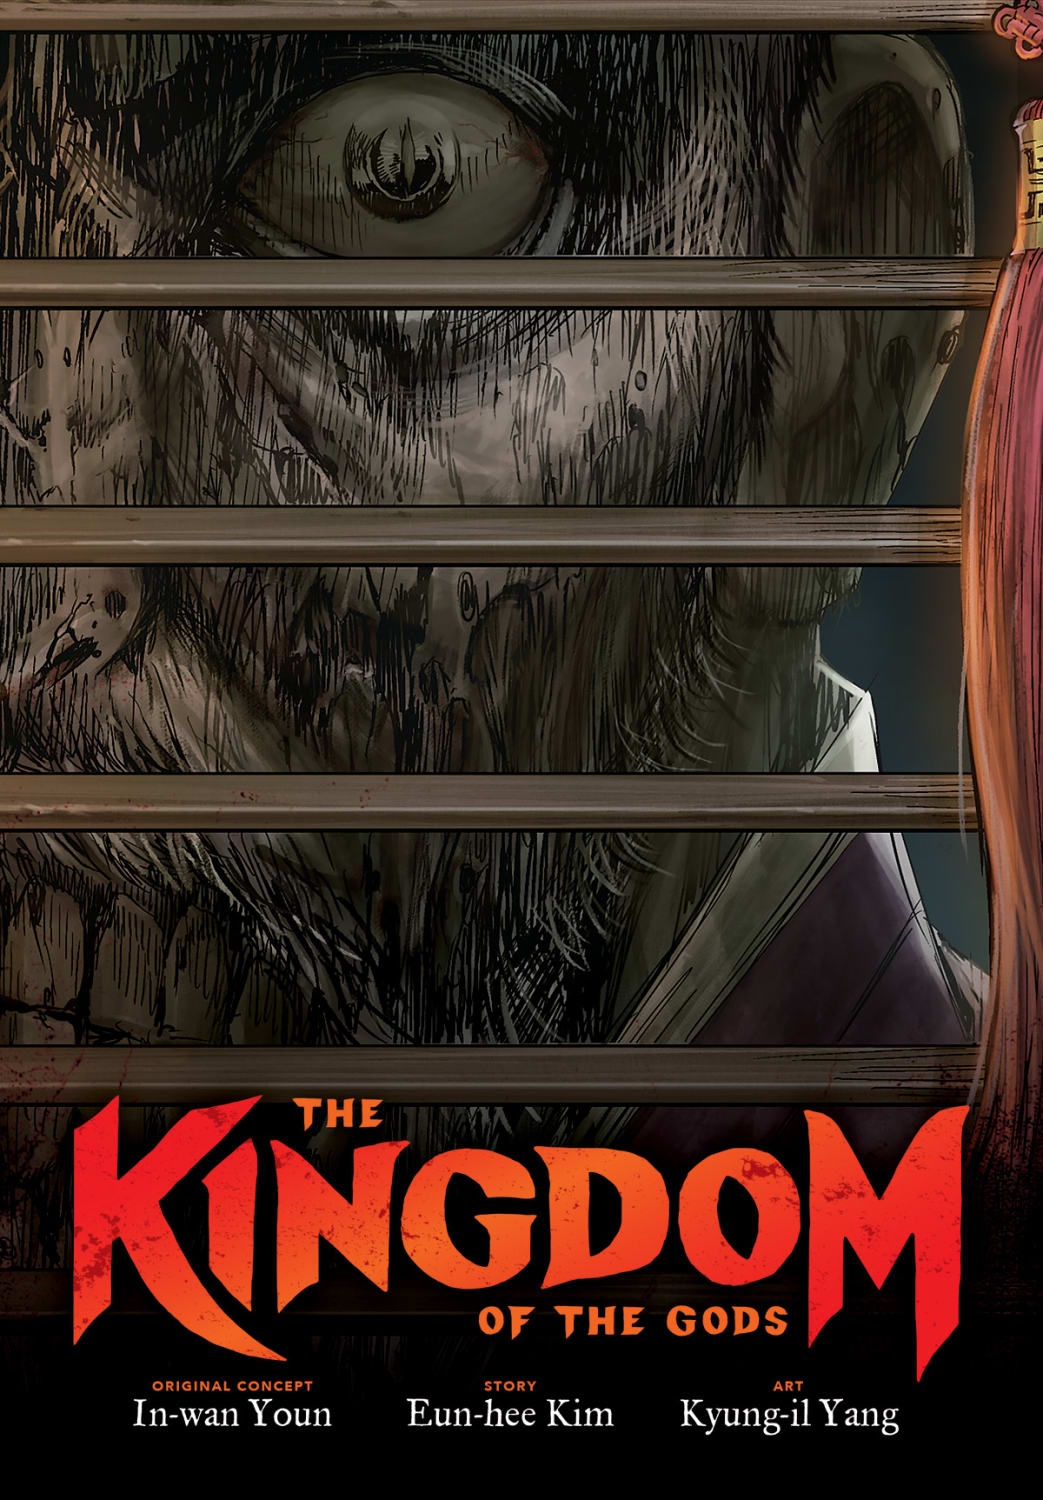 Read a Free Preview of The Kingdom of the Gods